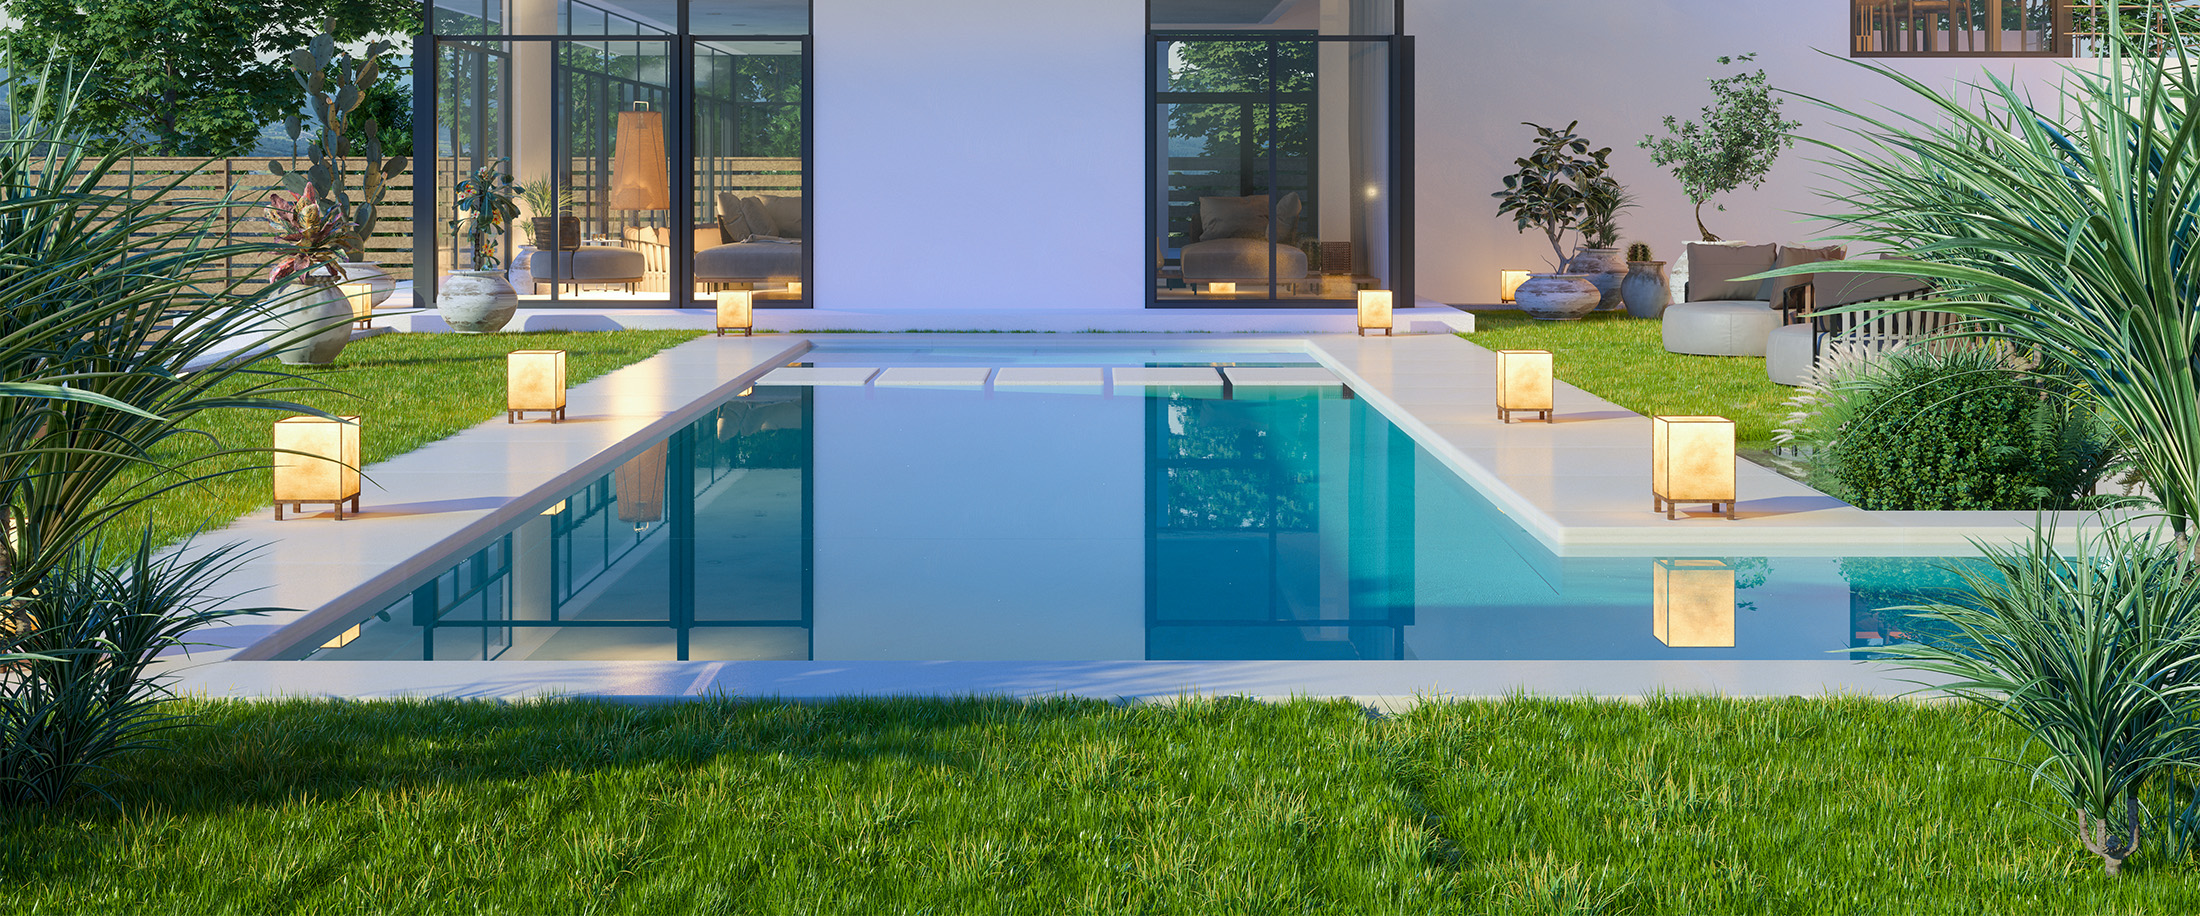 5 More Ways to Make Your Pool Environmentally-Friendly